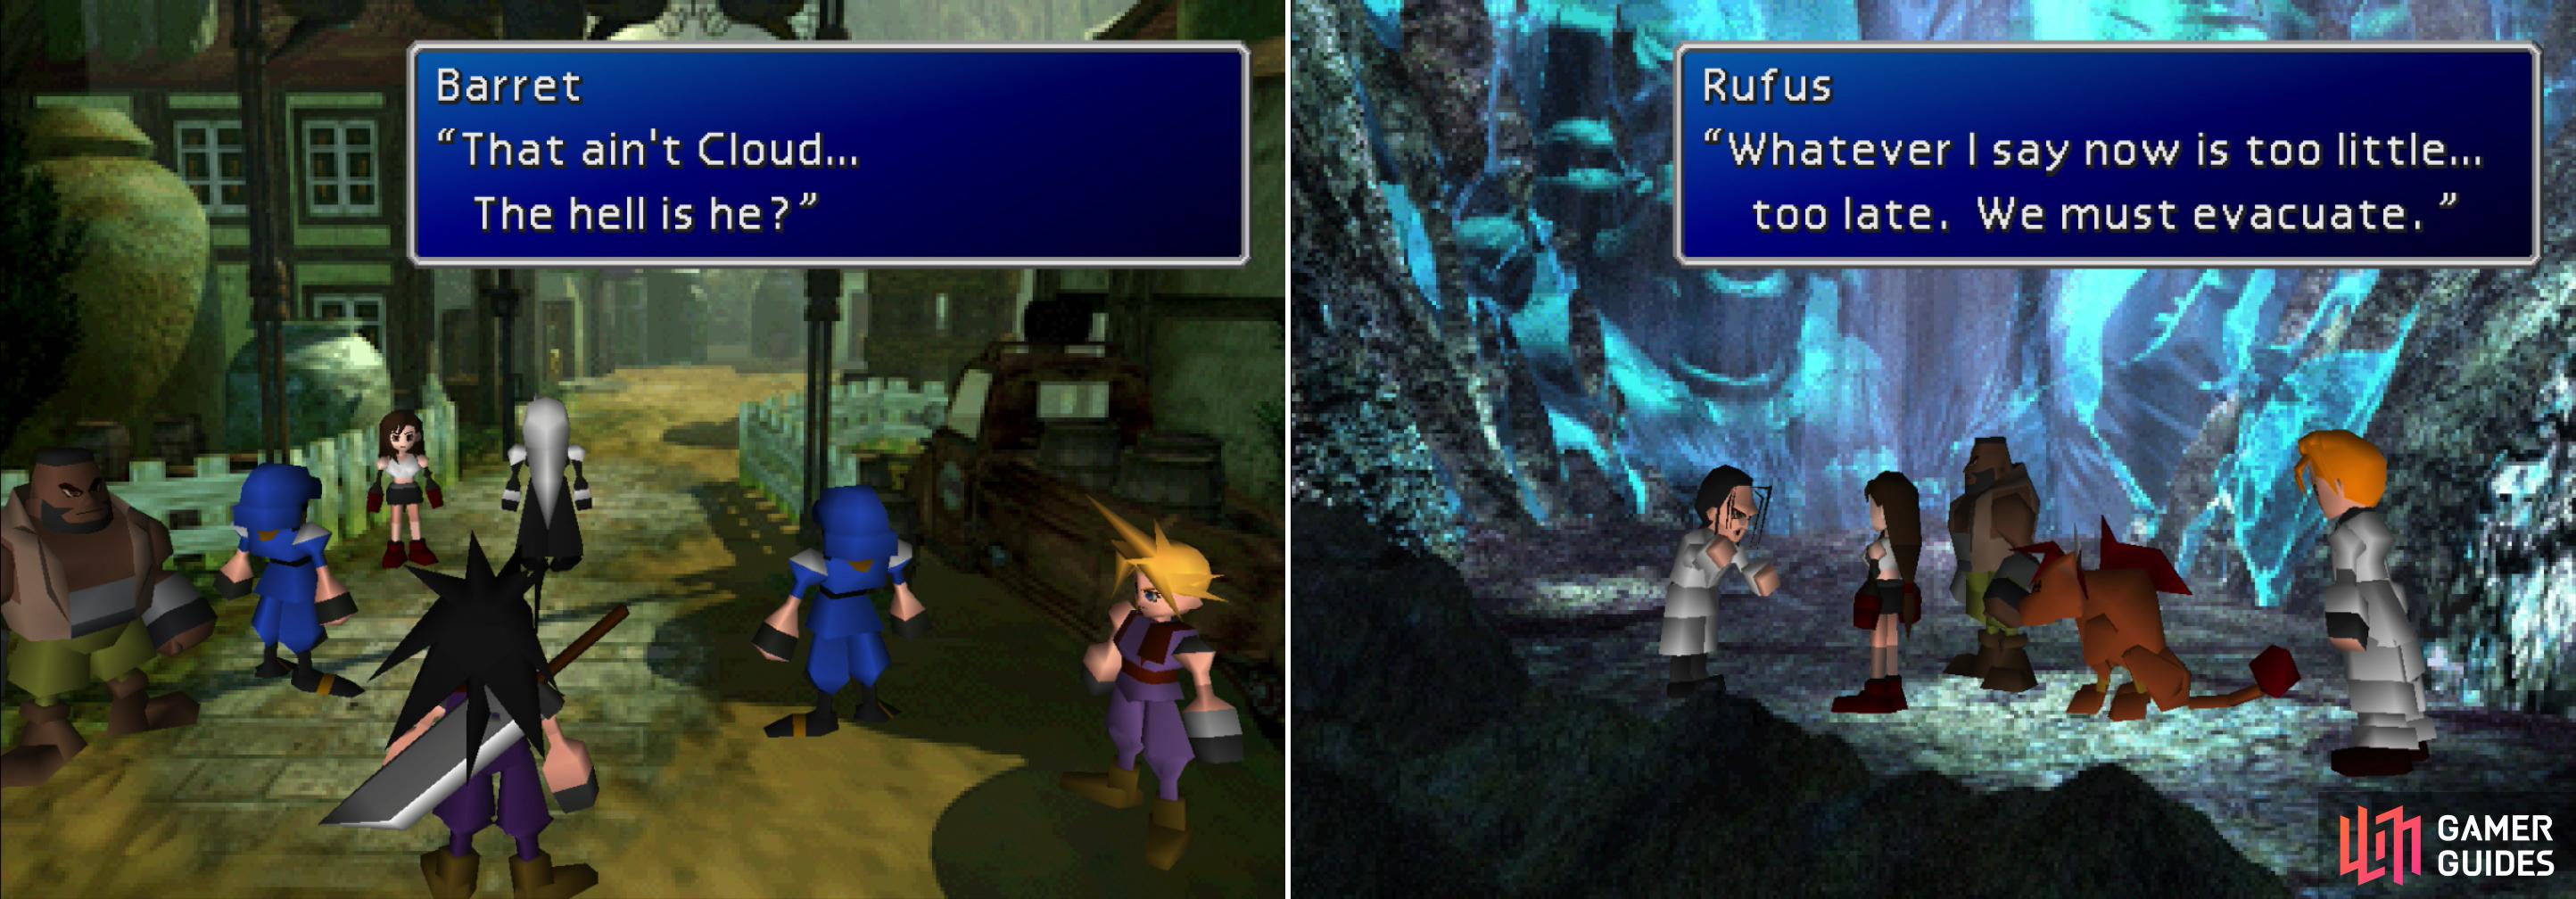 As Cloud closes in on the Promised Land, Sephiroth plays mind tricks with him by showing him illusions that call his past into question (left). After Clouds encounter with Sephiroth, the party and Shinra make odd bed-fellows (right).